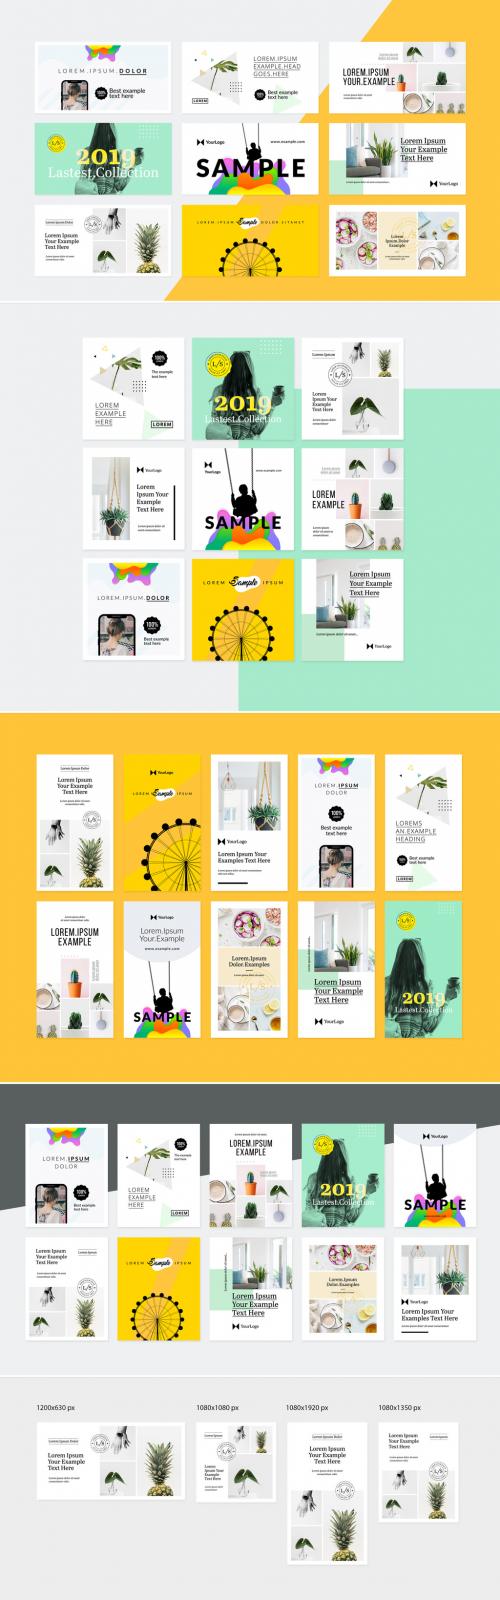 Colorful Social Media Kit with Green and Yellow Accents - 265205132